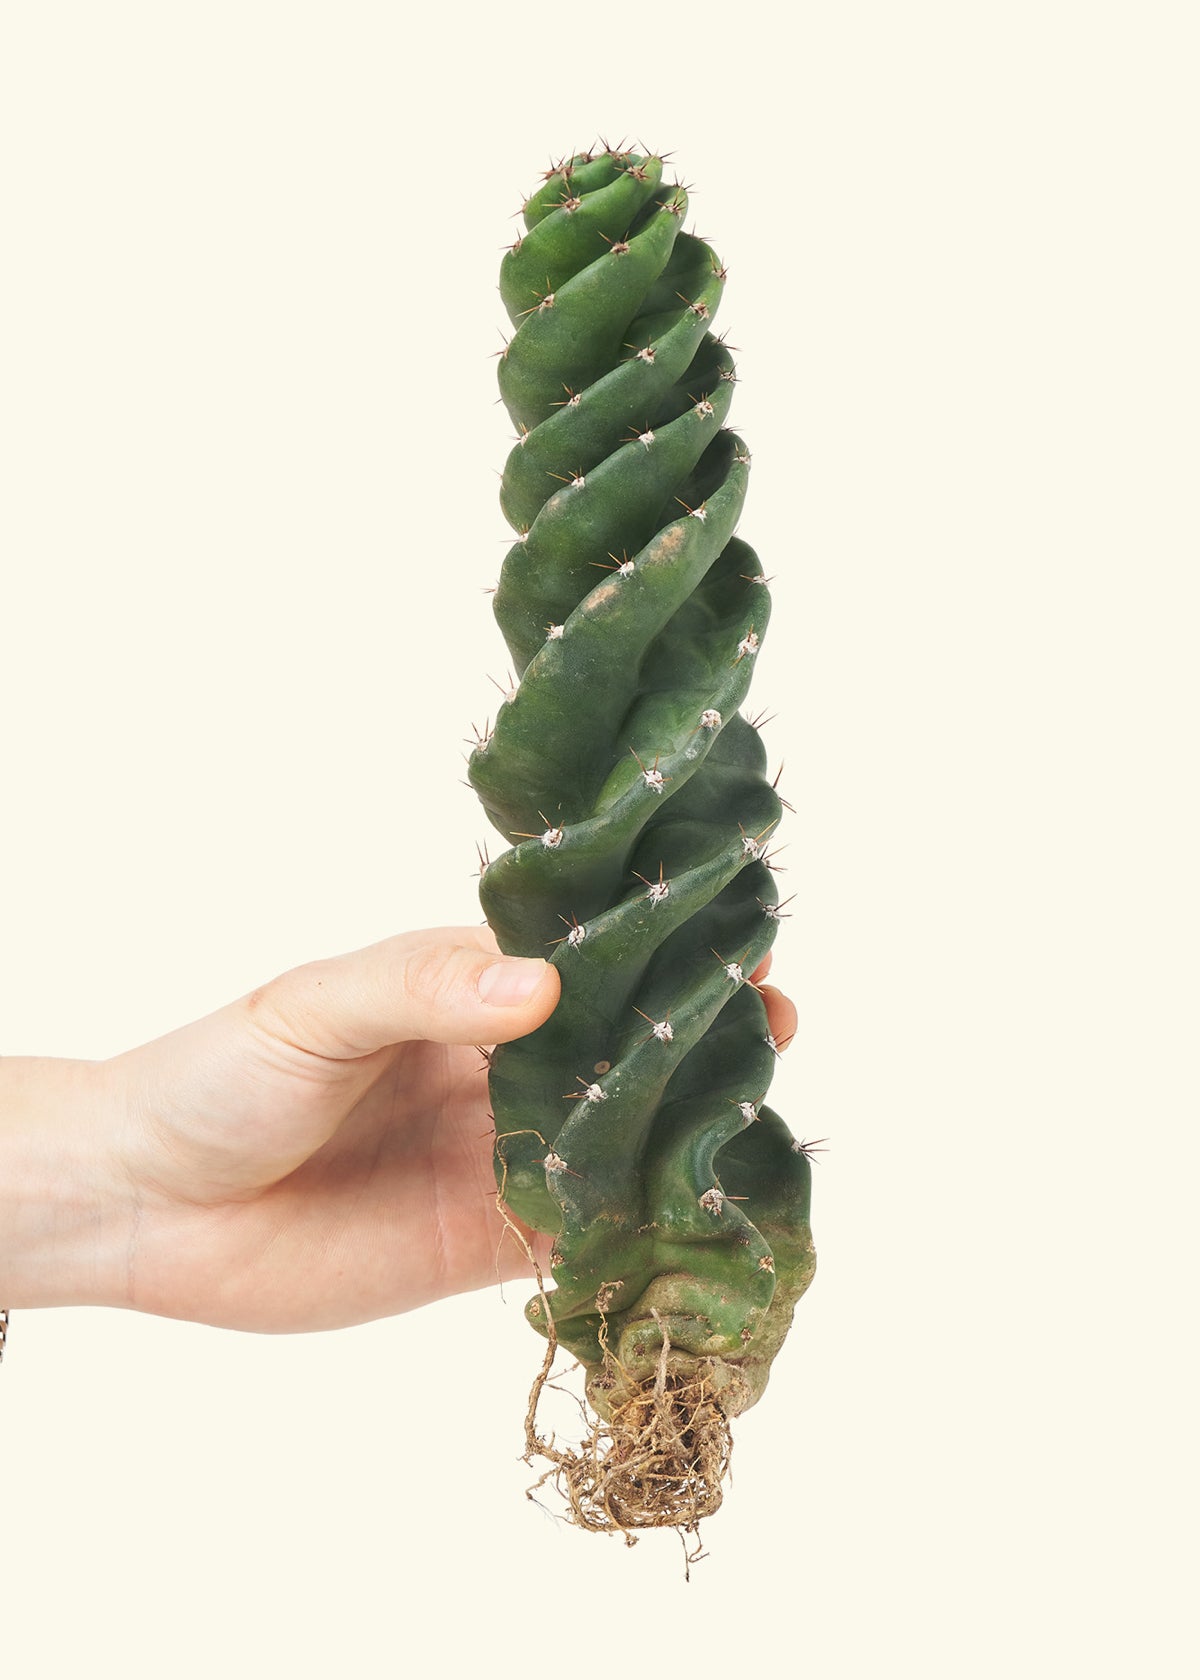 Hand holding another spiral cactus, side profile